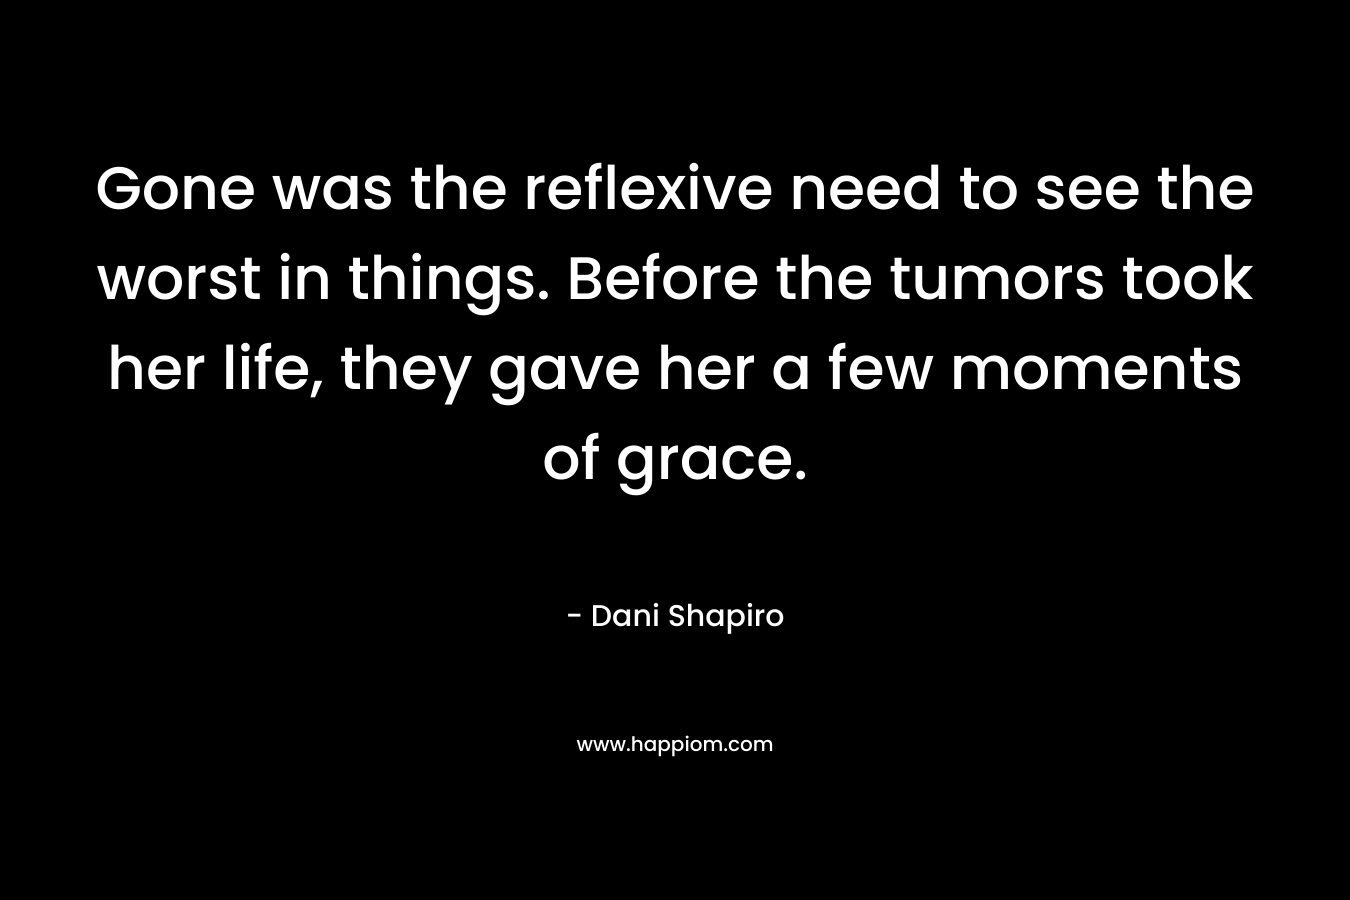 Gone was the reflexive need to see the worst in things. Before the tumors took her life, they gave her a few moments of grace. – Dani Shapiro